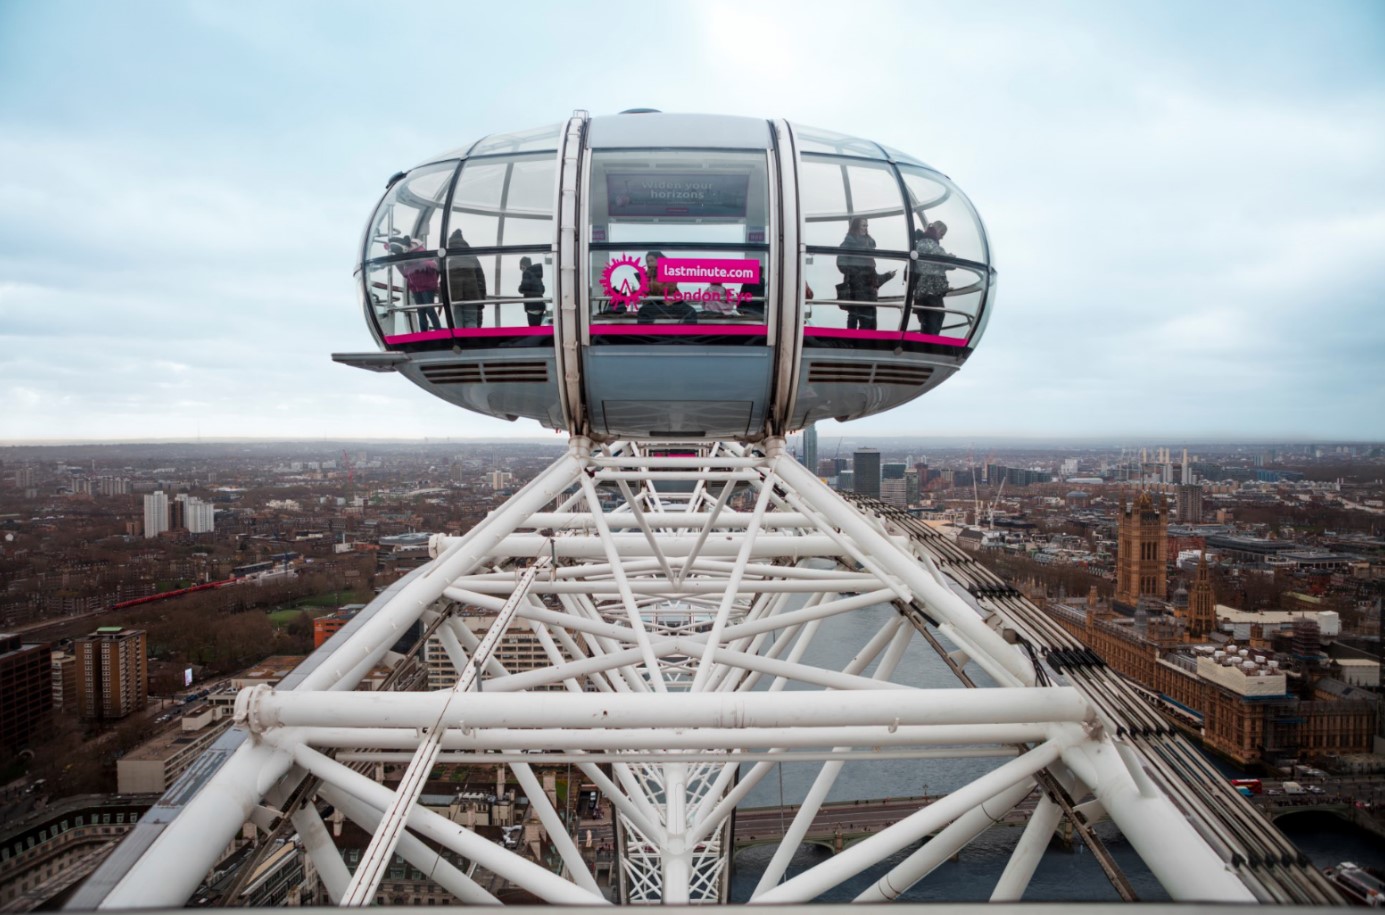 Up in the sky with The London Eye